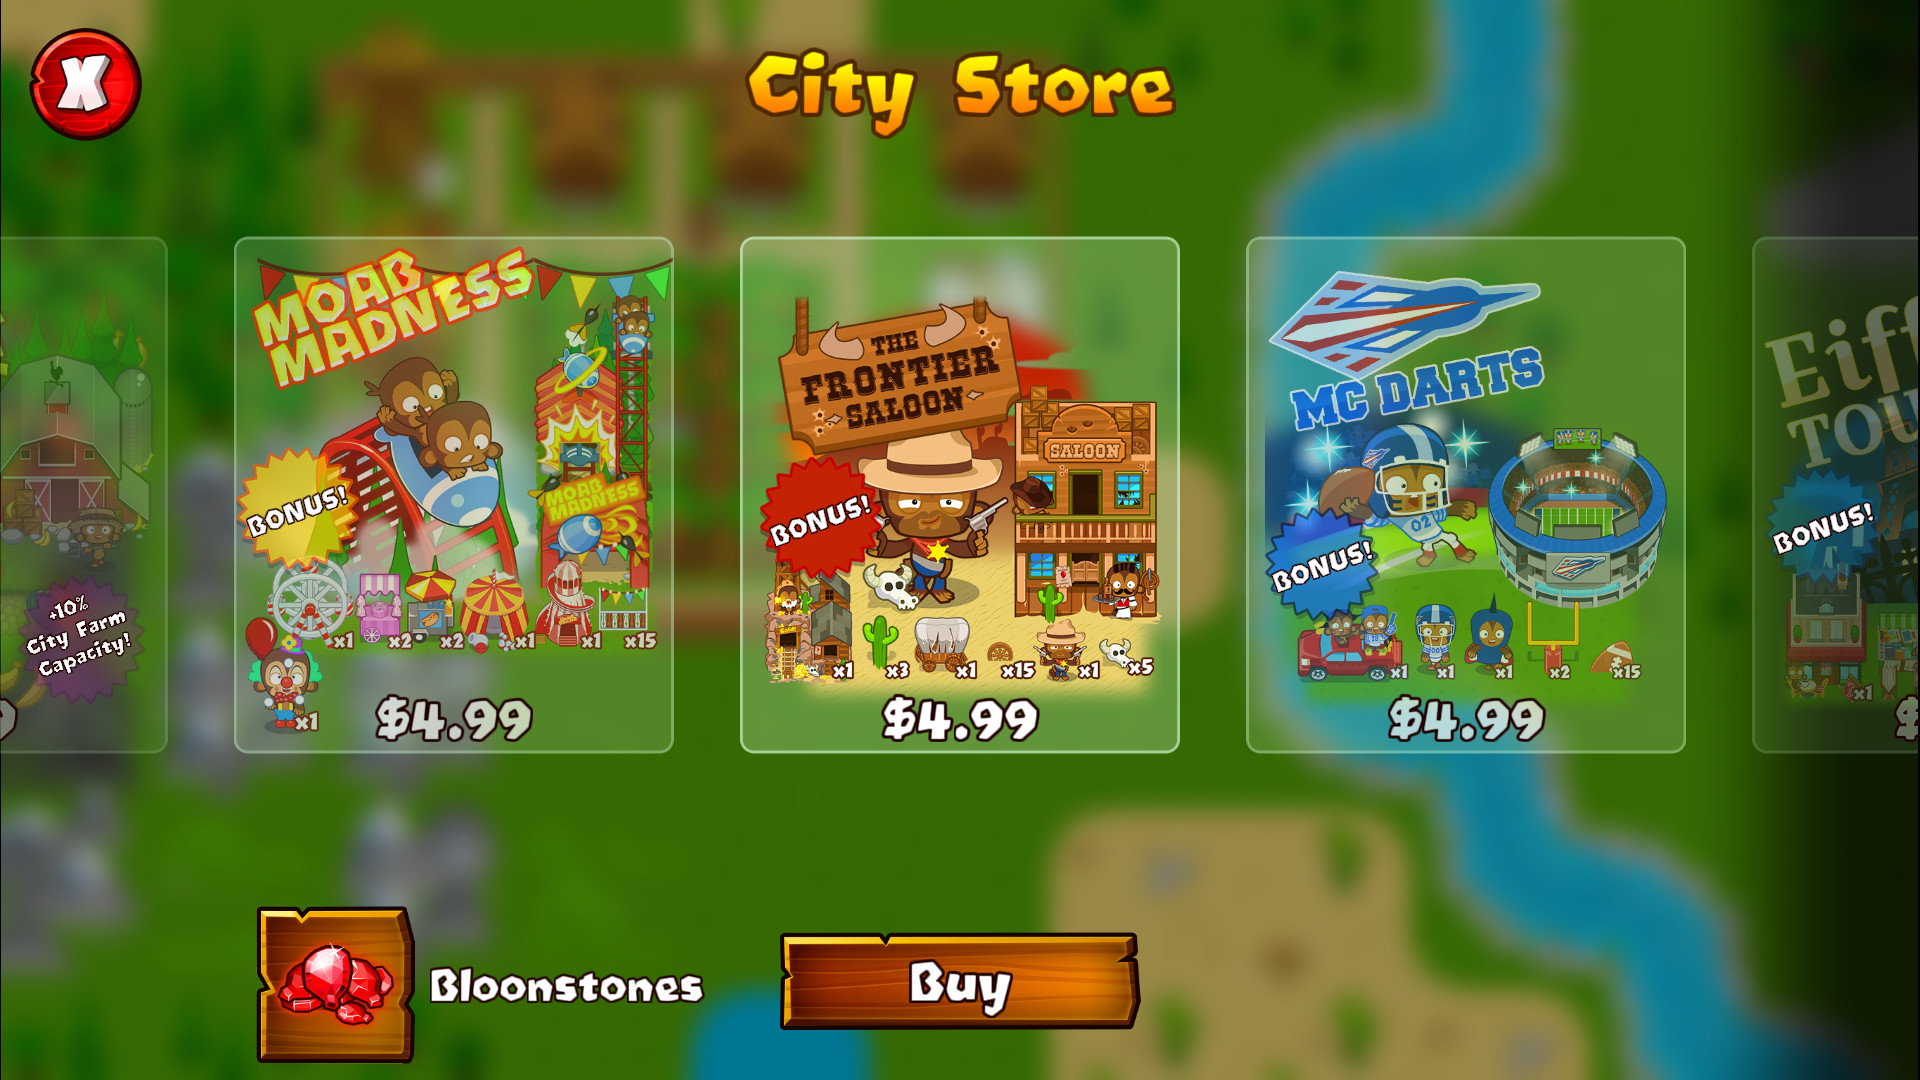 Bloons Monkey City - Frontier Pack Featured Screenshot #1